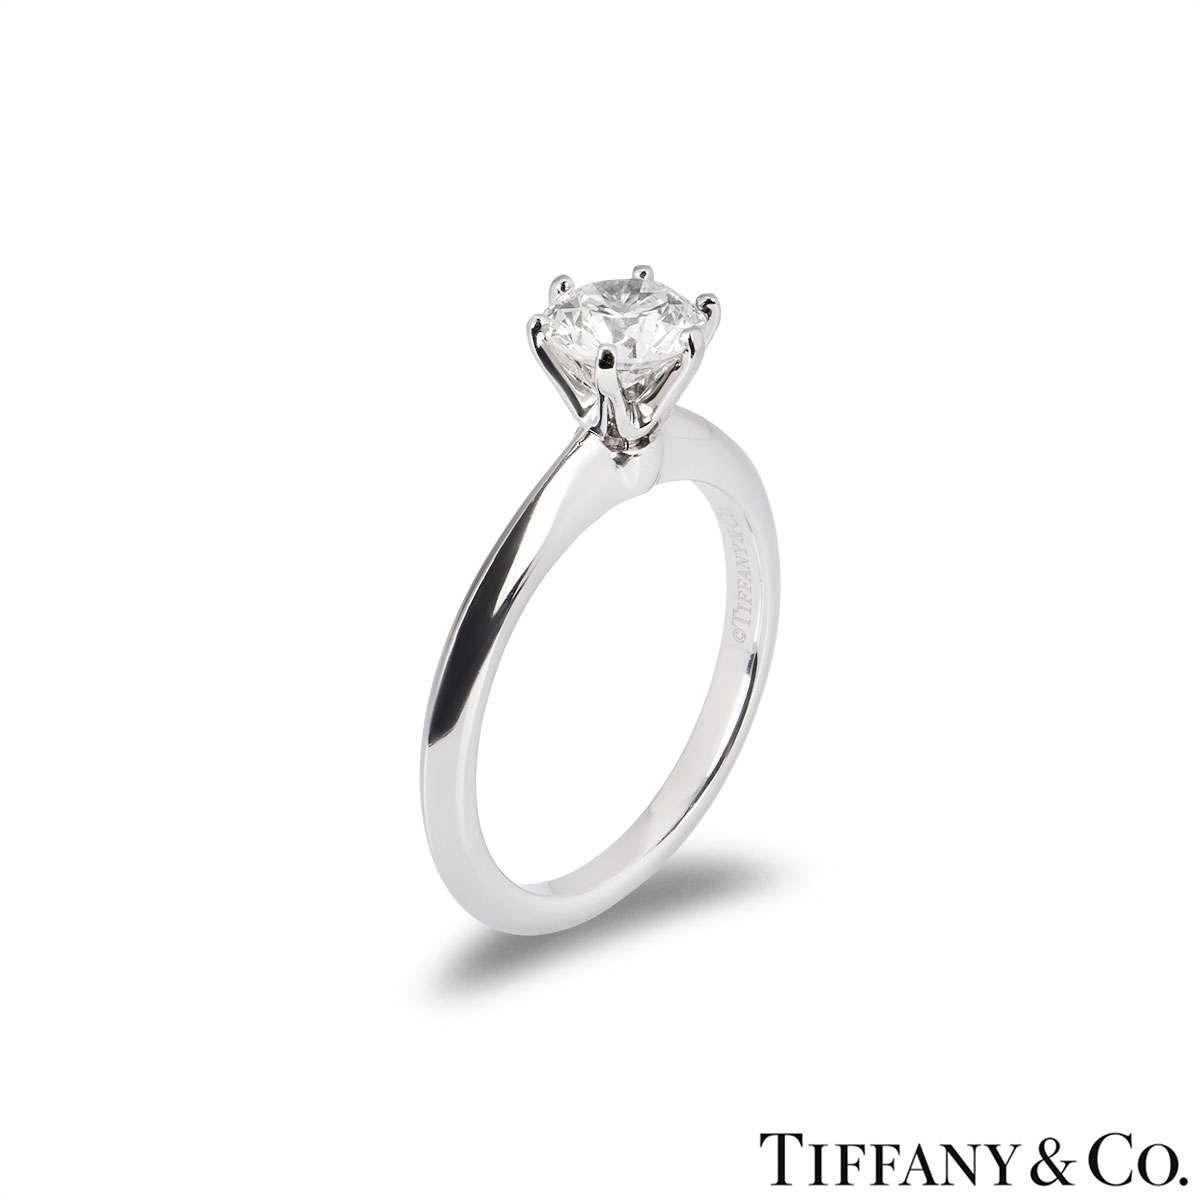 A beautiful platinum diamond ring by Tiffany & Co. from The Setting collection. The ring comprises of a round brilliant cut diamond in a 6 claw setting with a weight of 0.86ct, H colour and VVS1 clarity. The diamond scores an excellent rating in all